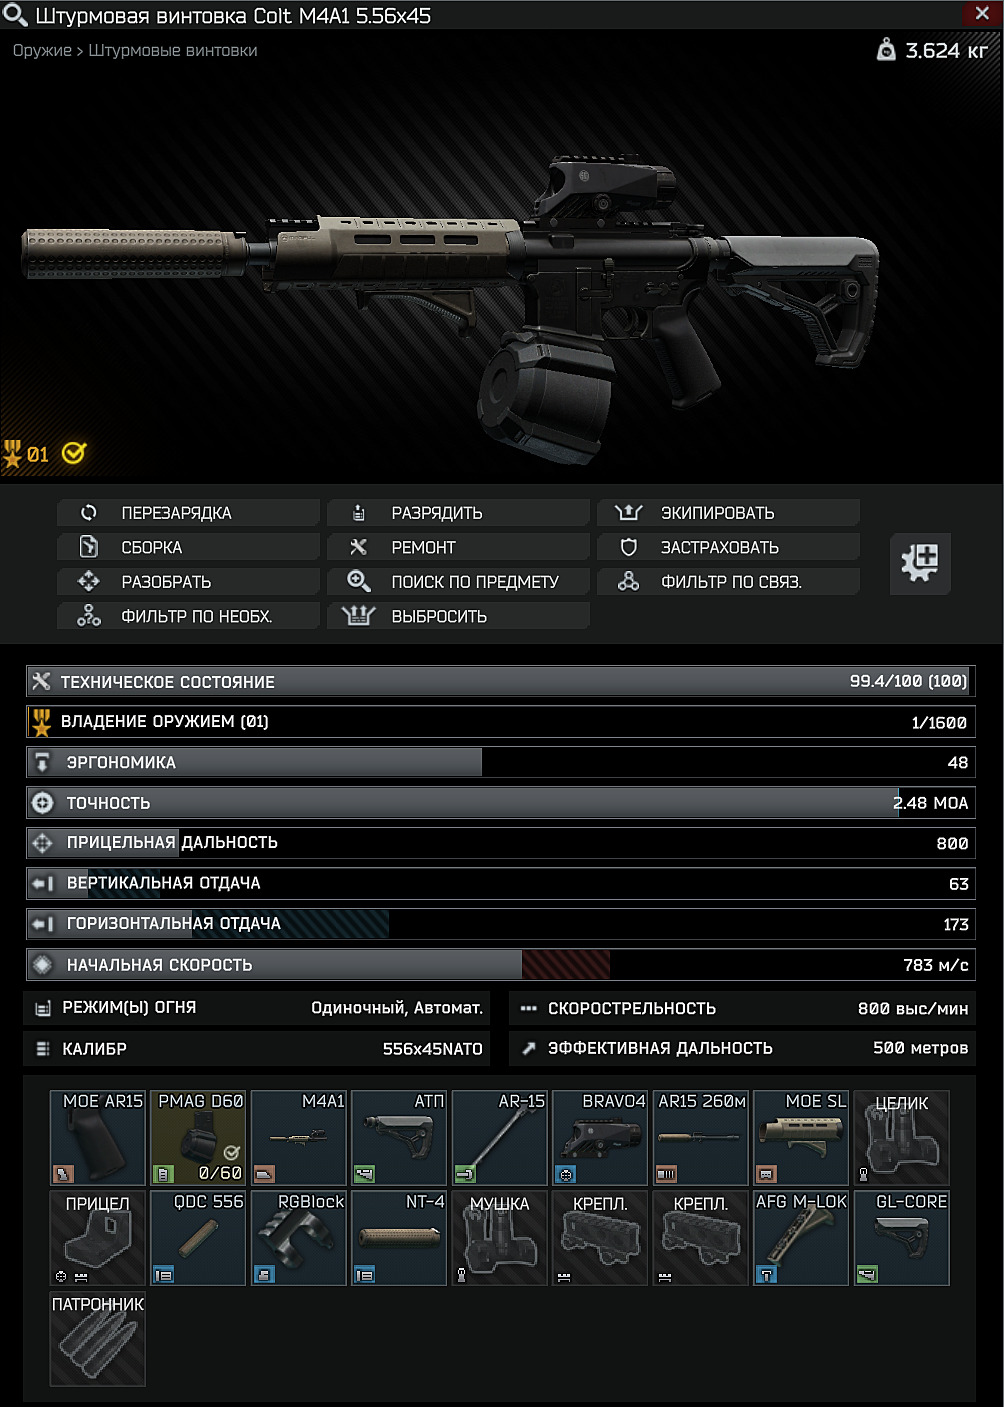 New Gunsmith Part 7 quest guide. How to make M4A1, where to get 60